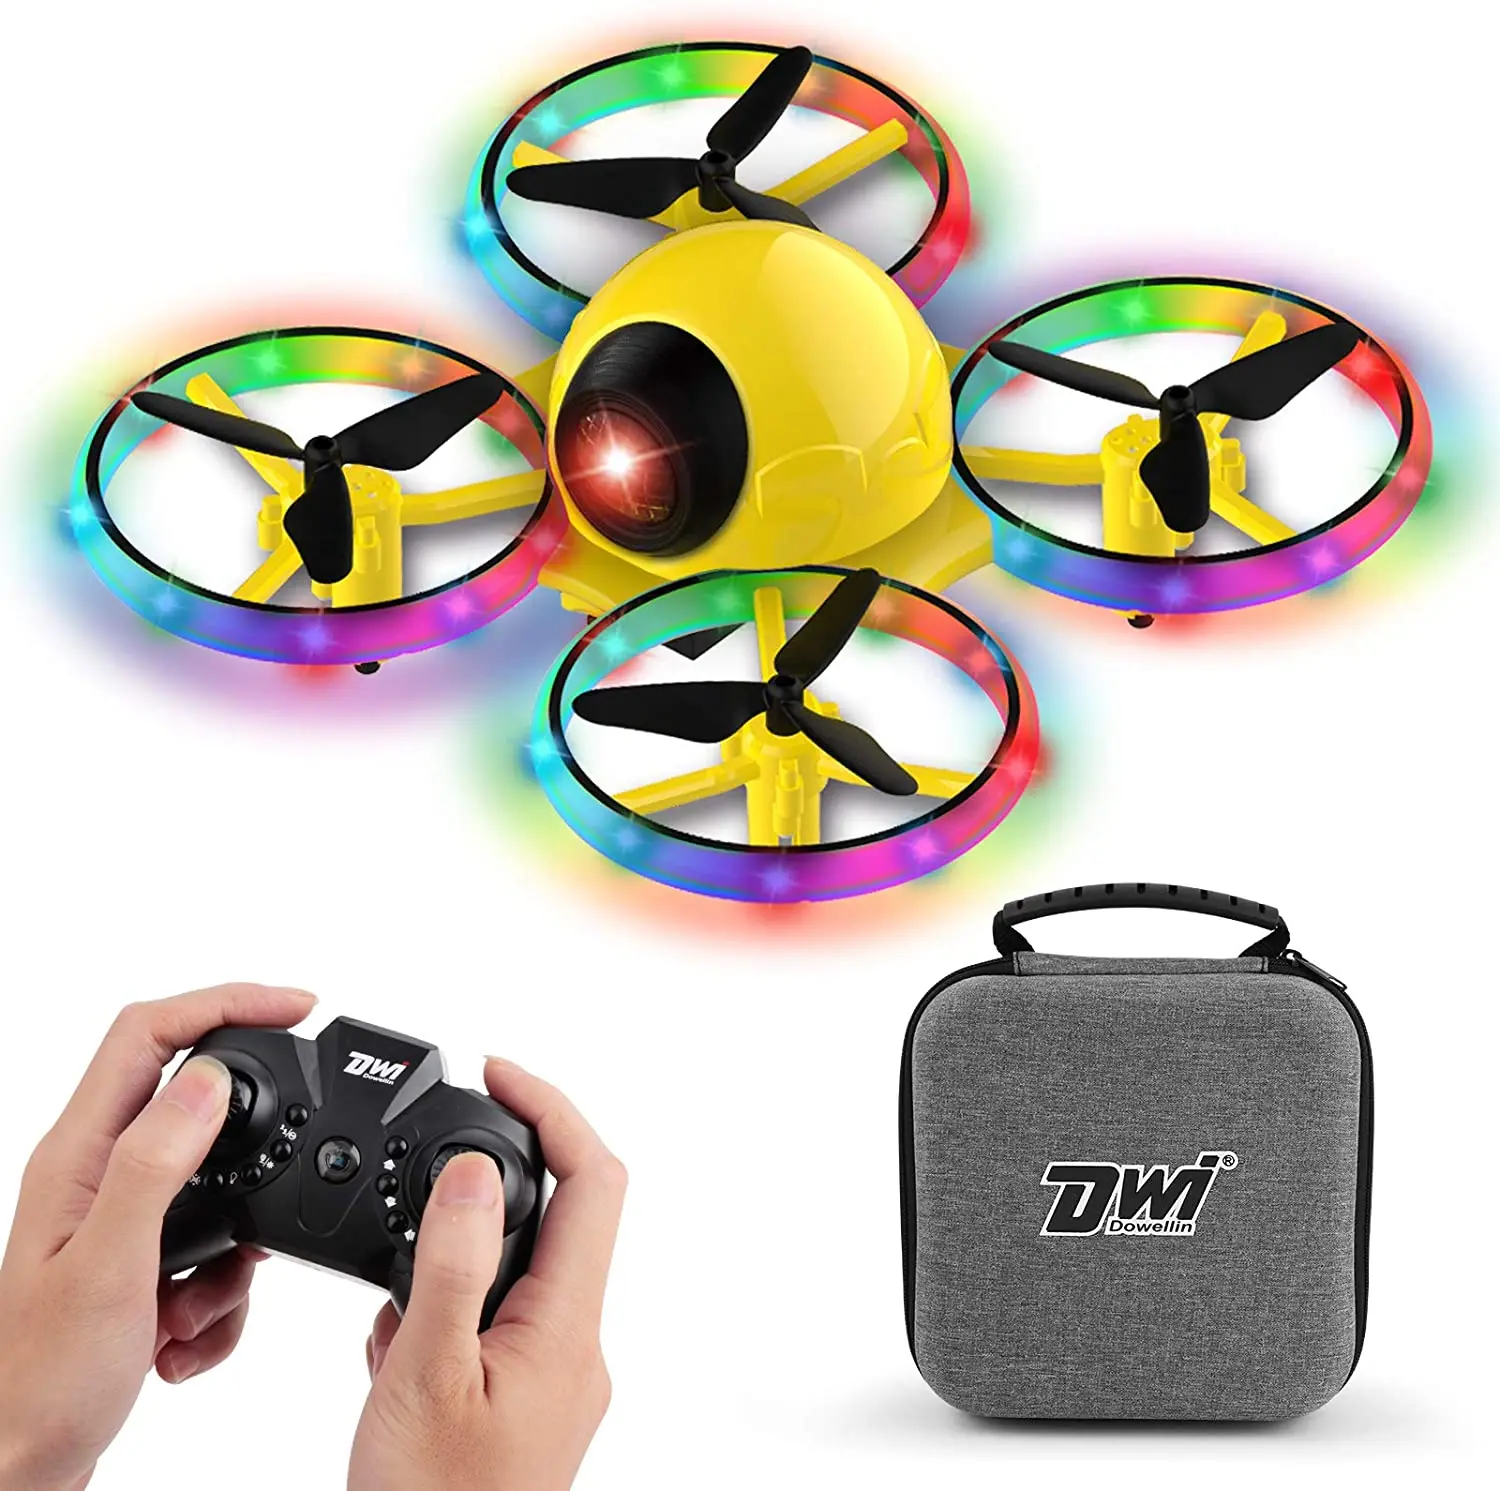 Dwi Dowellin 10 Minutes Long Flight Time Mini Drone for Kids with Blinking Light One Key Take Off Spin Flips Crash Proof RC Nano Quadcopter Toys Drones for Beginners Boys and Girls Green 